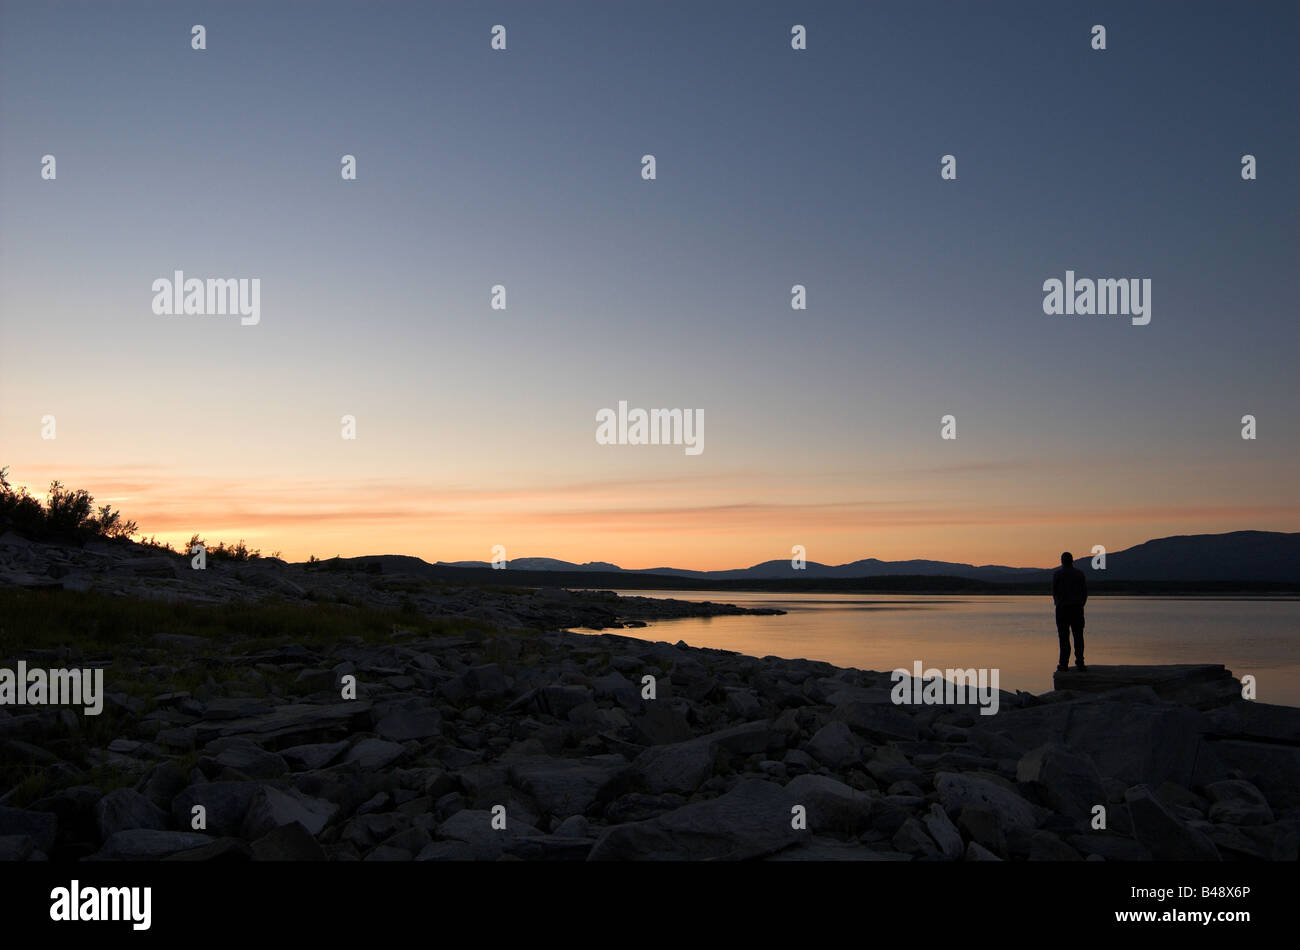 Silhouetted figure looking out over lake at sunset, Lapland / Arctic Sweden Stock Photo